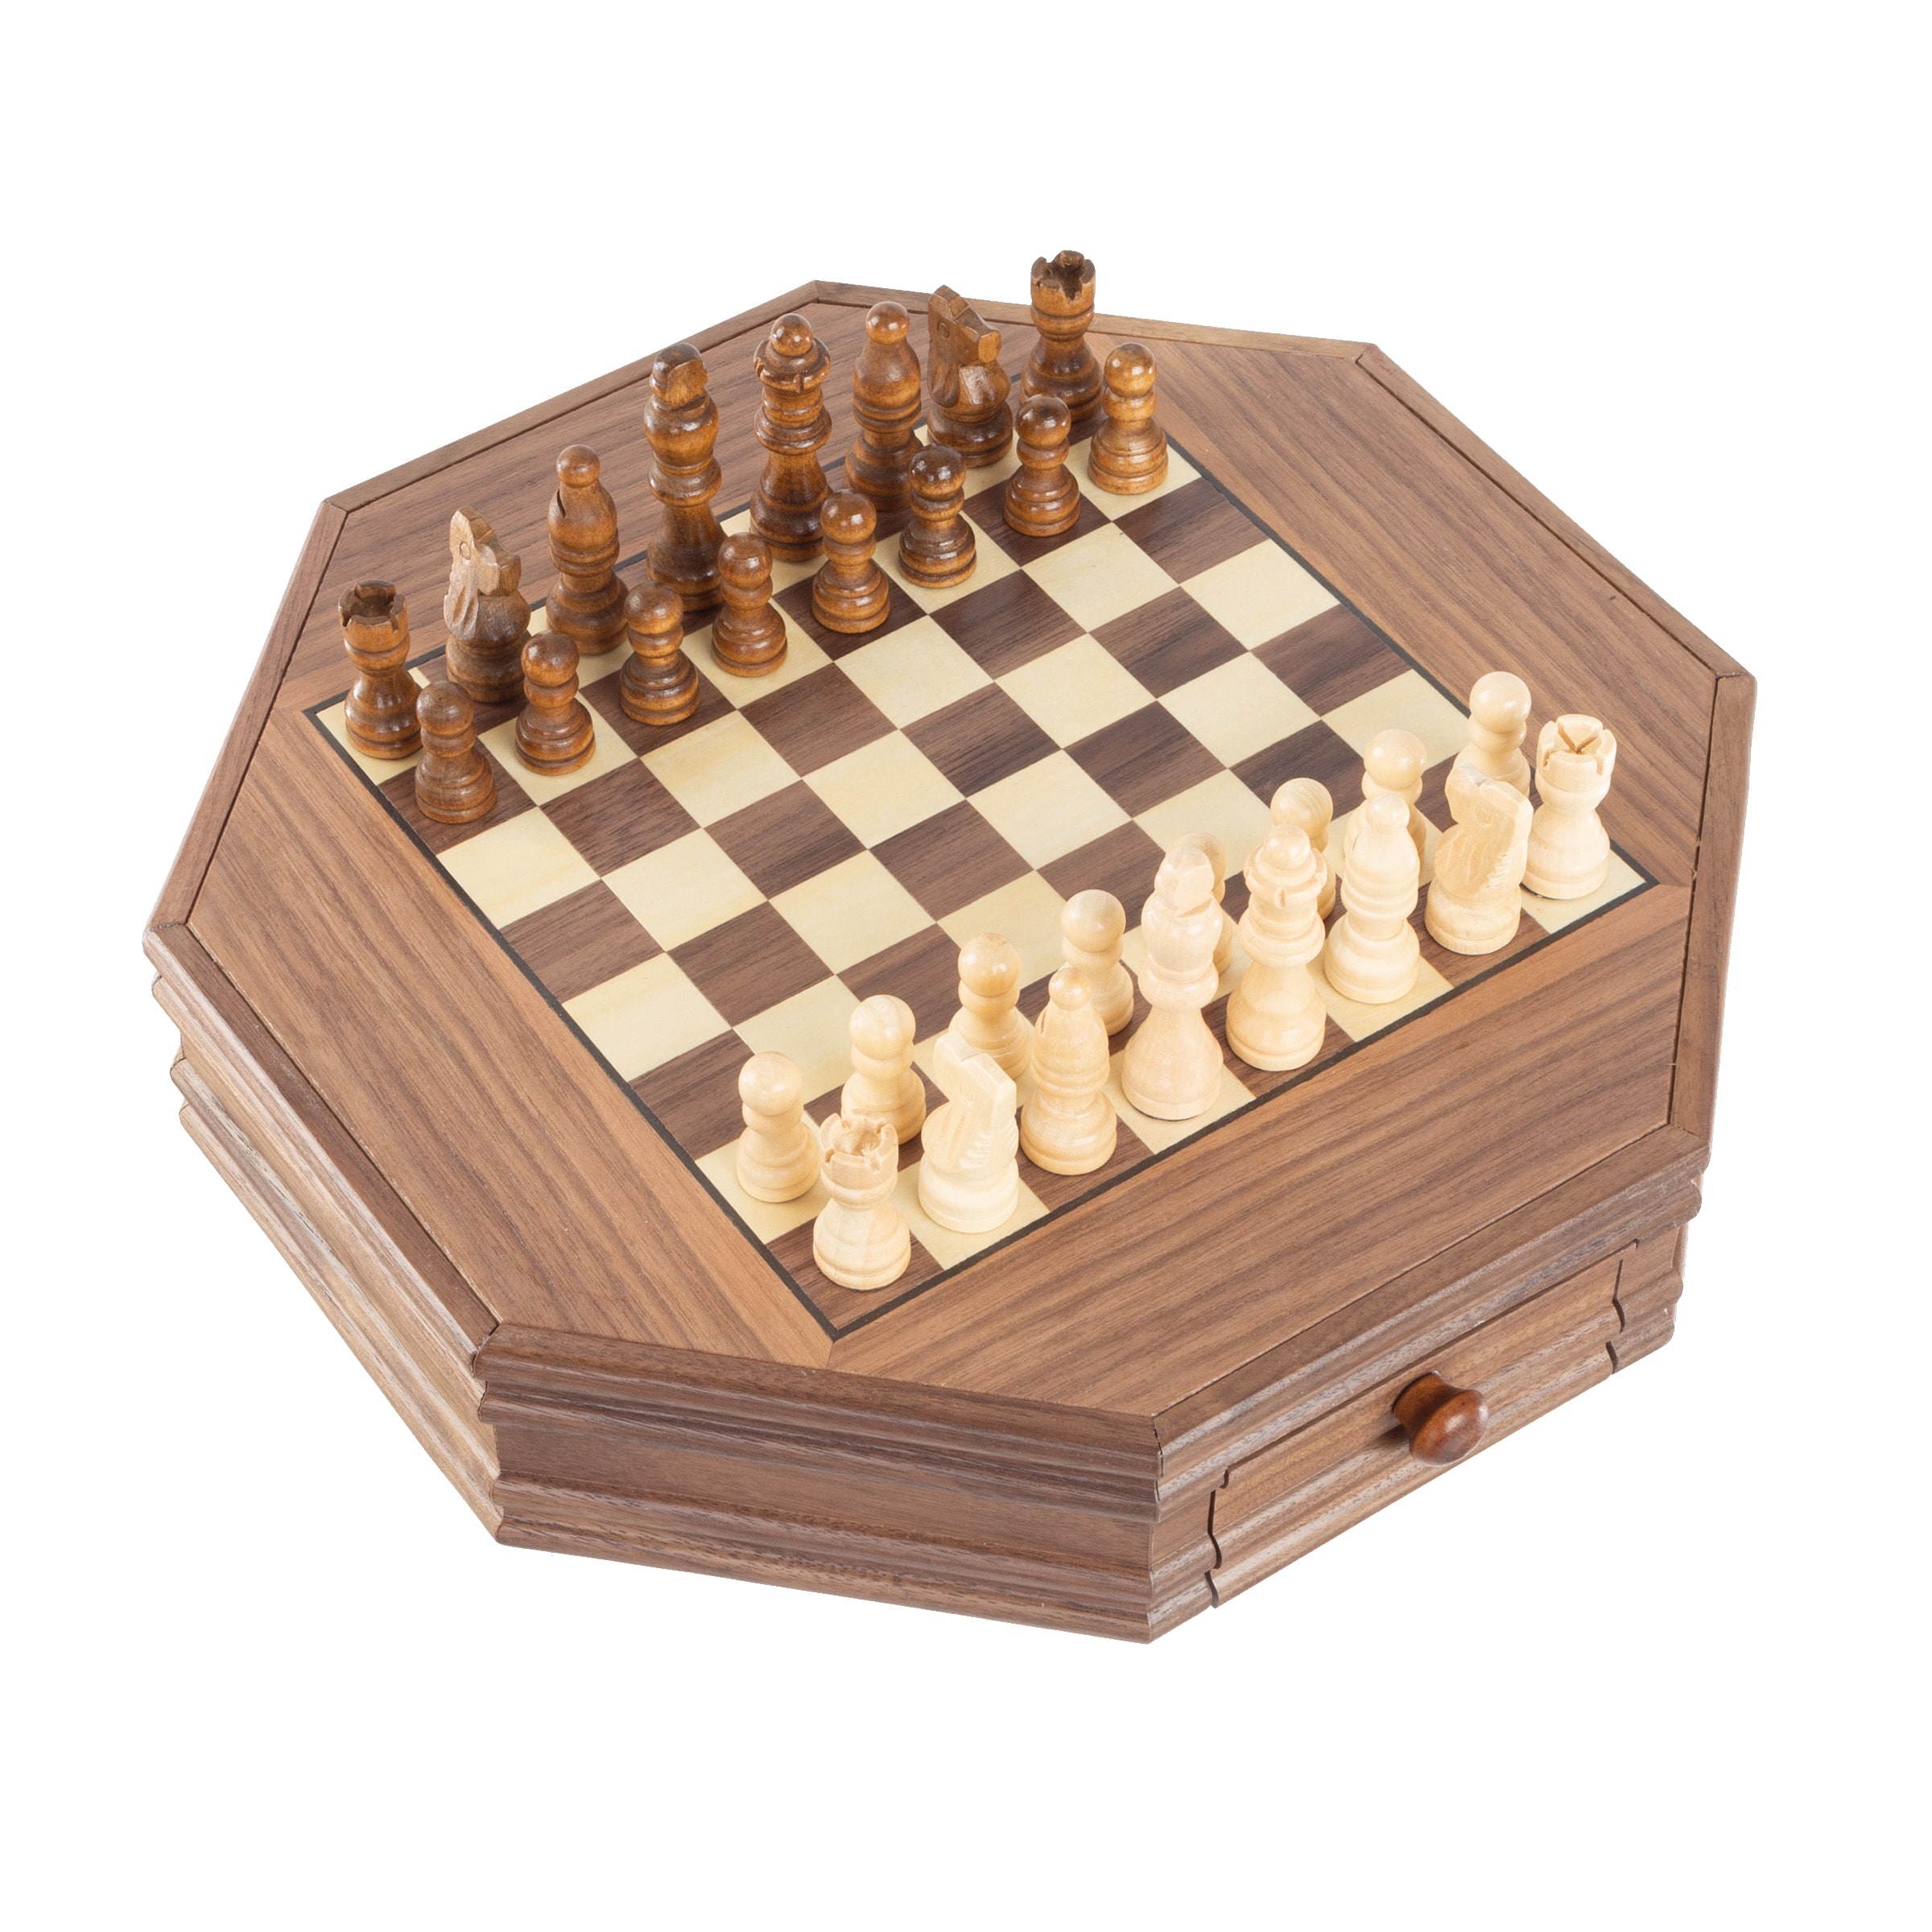 Toy Time 7-in-1 Classic Wooden Board Game Set - Chess, Checkers